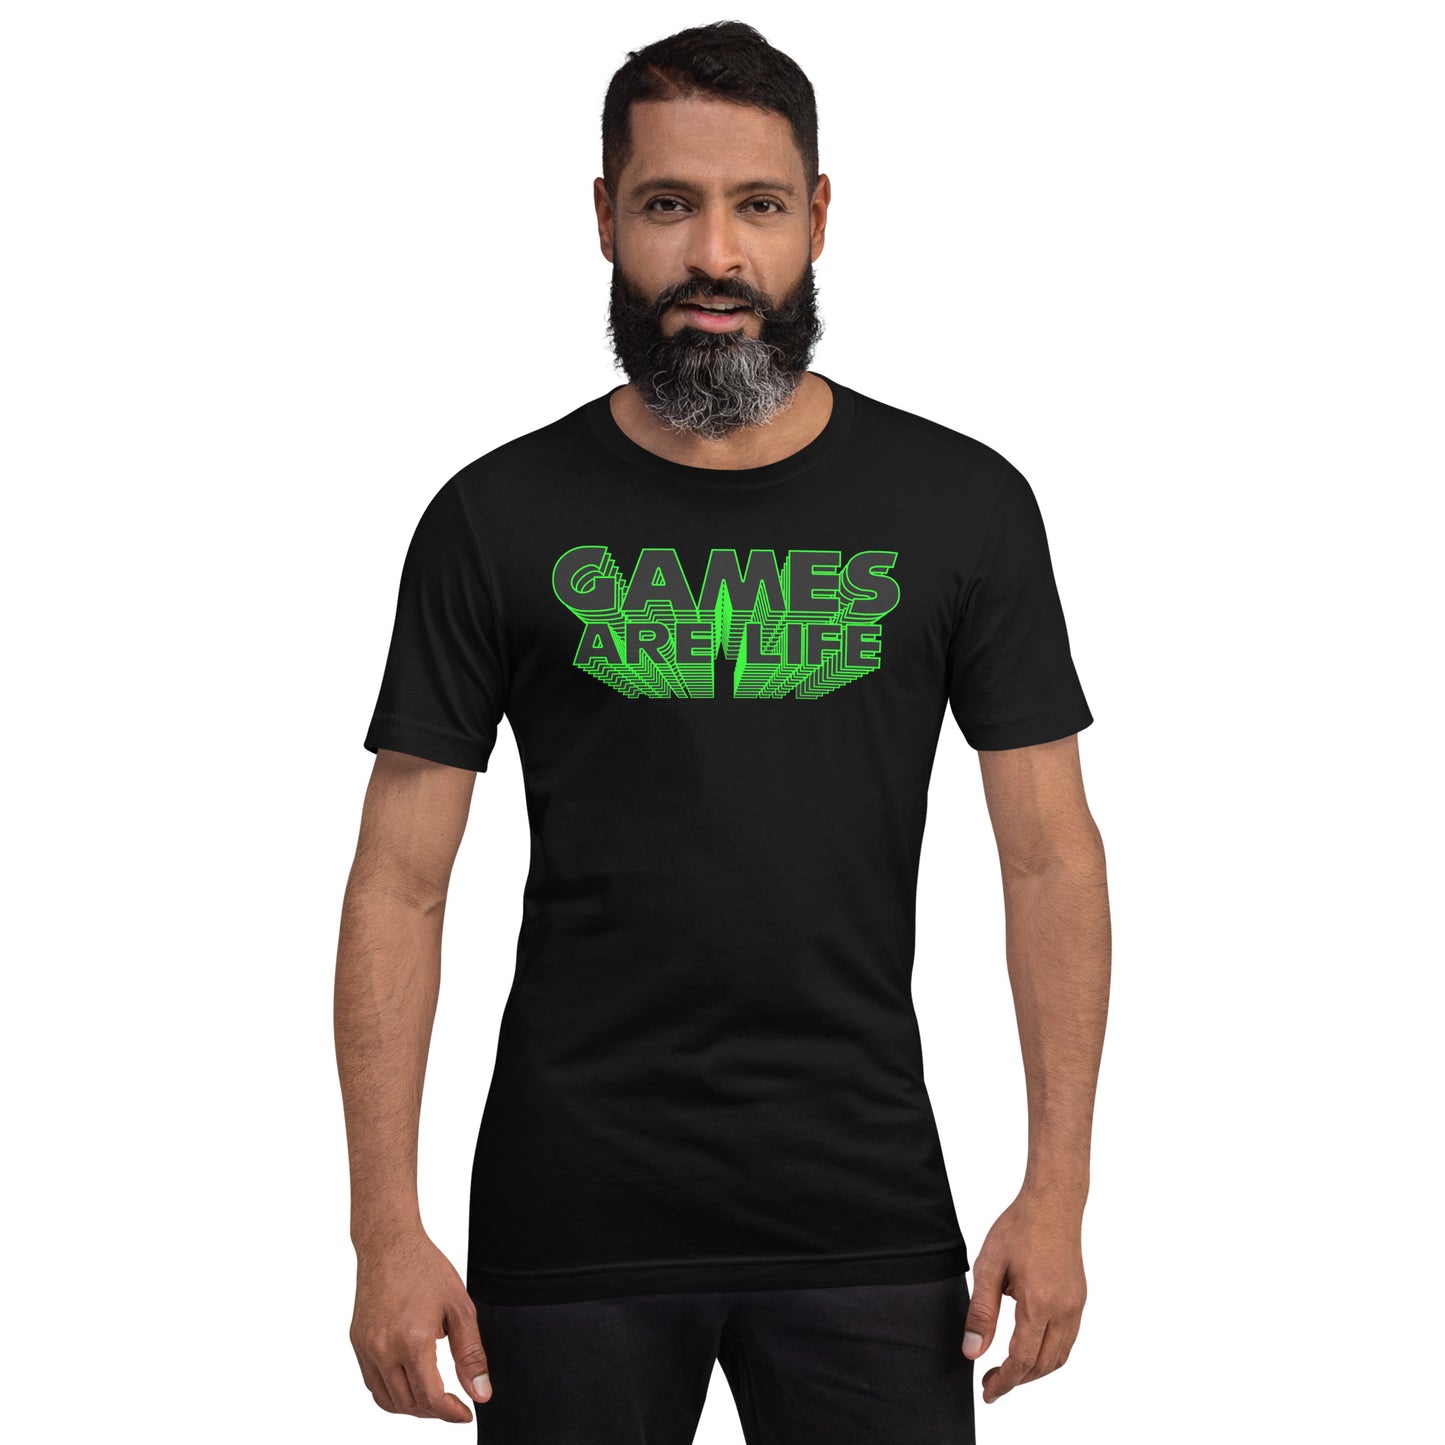 Games Are Life Black Unisex T-shirt